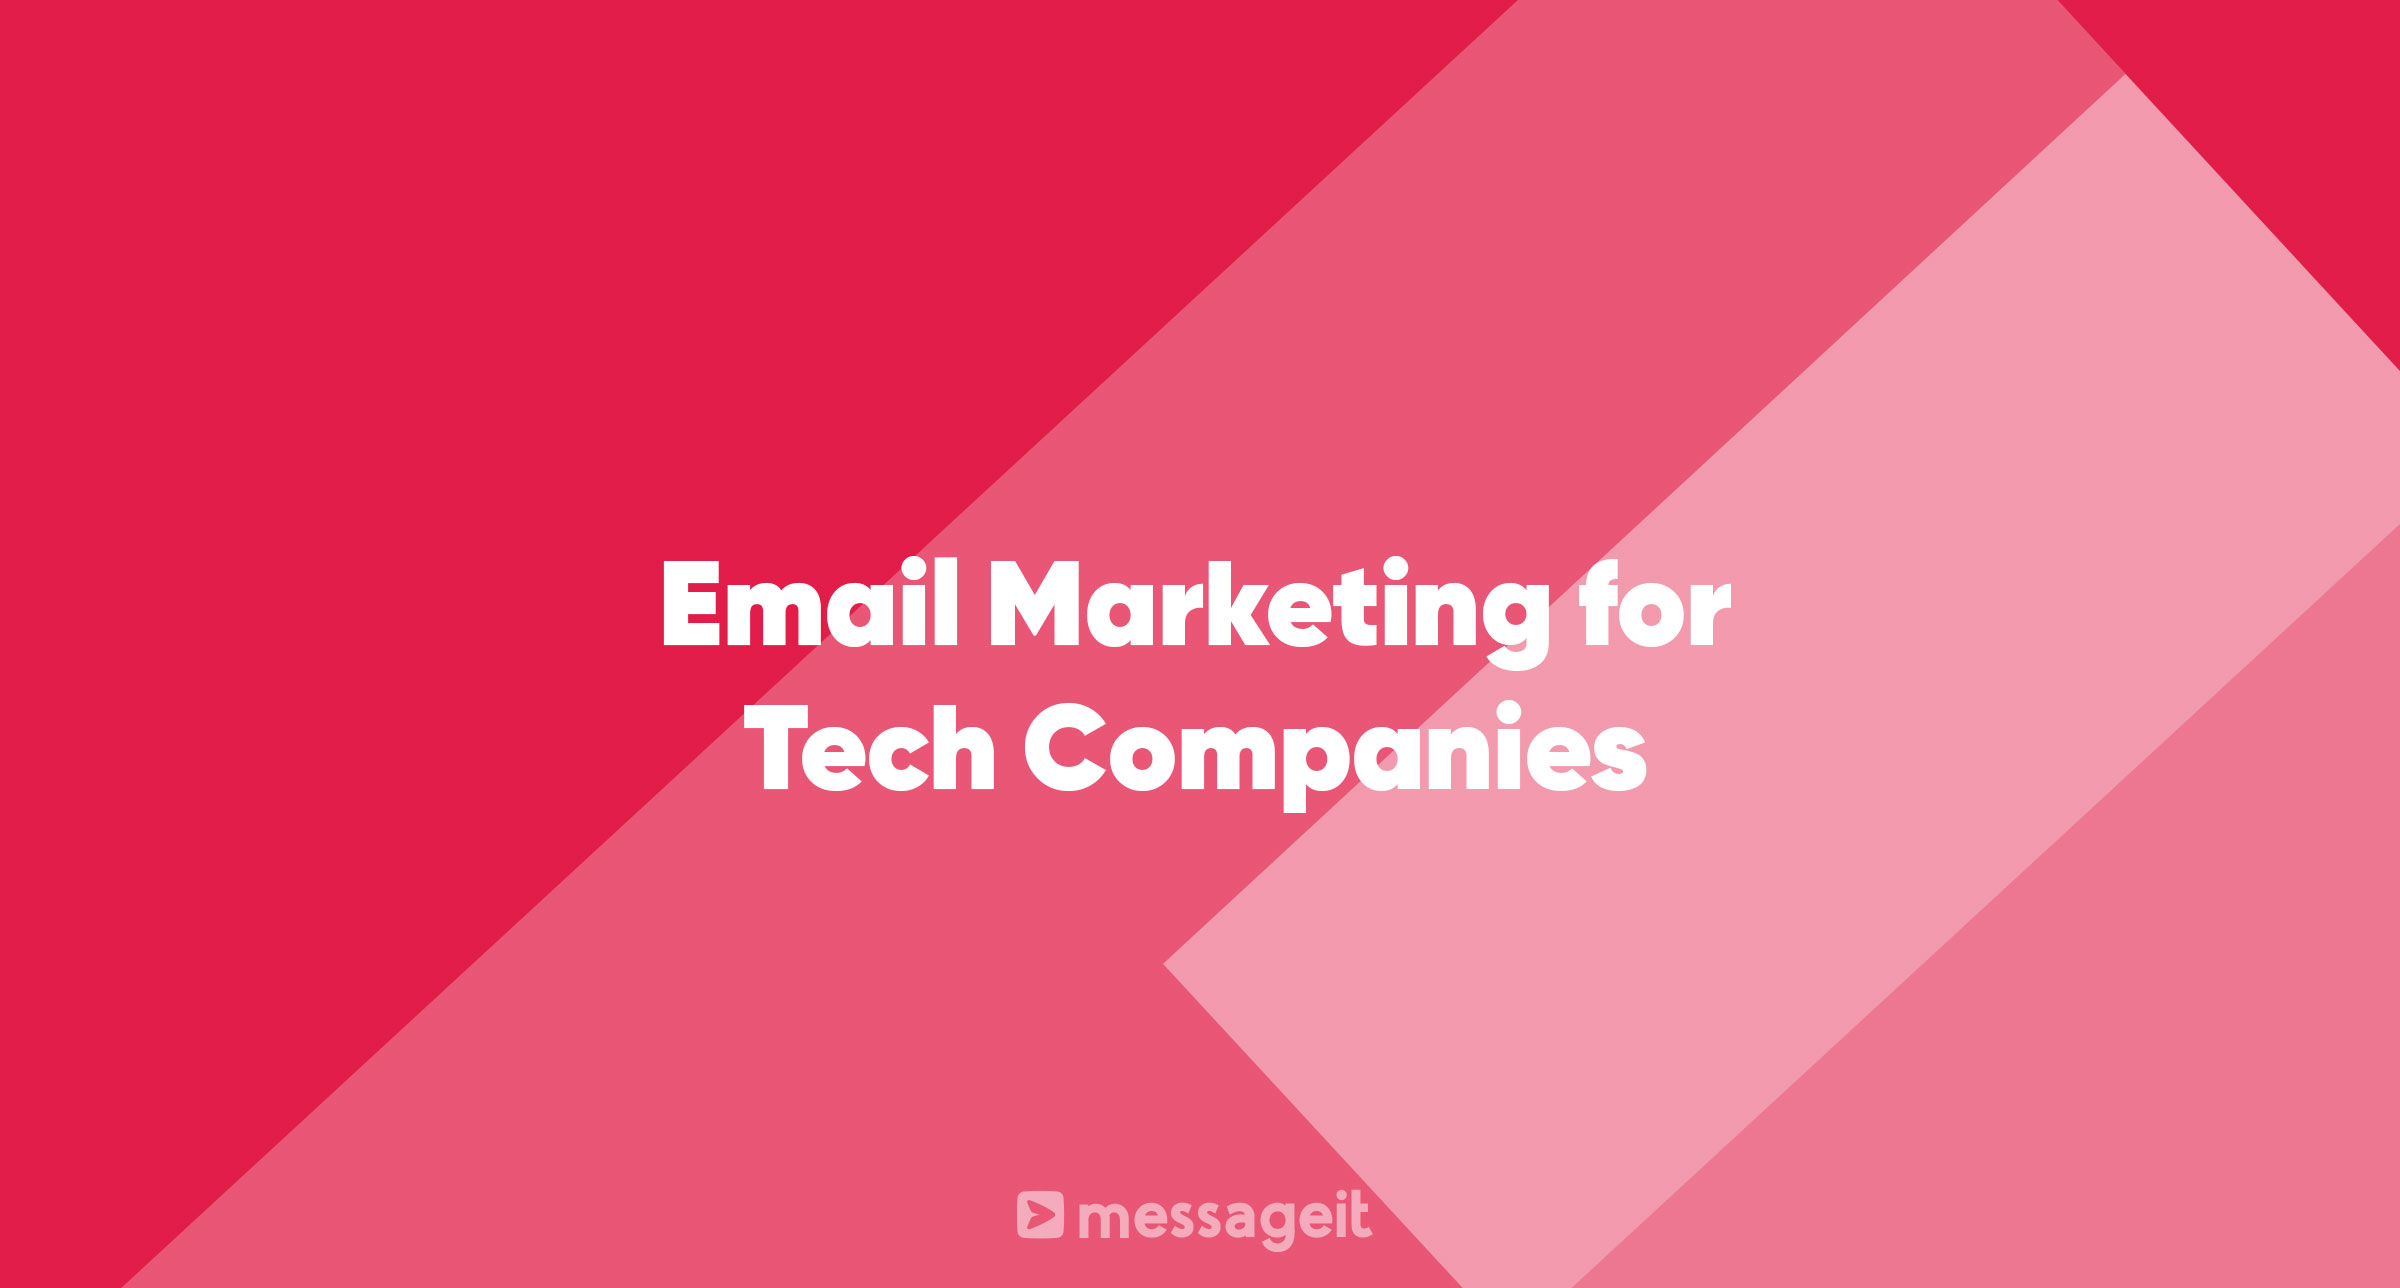 Article | Email Marketing for Tech Companies